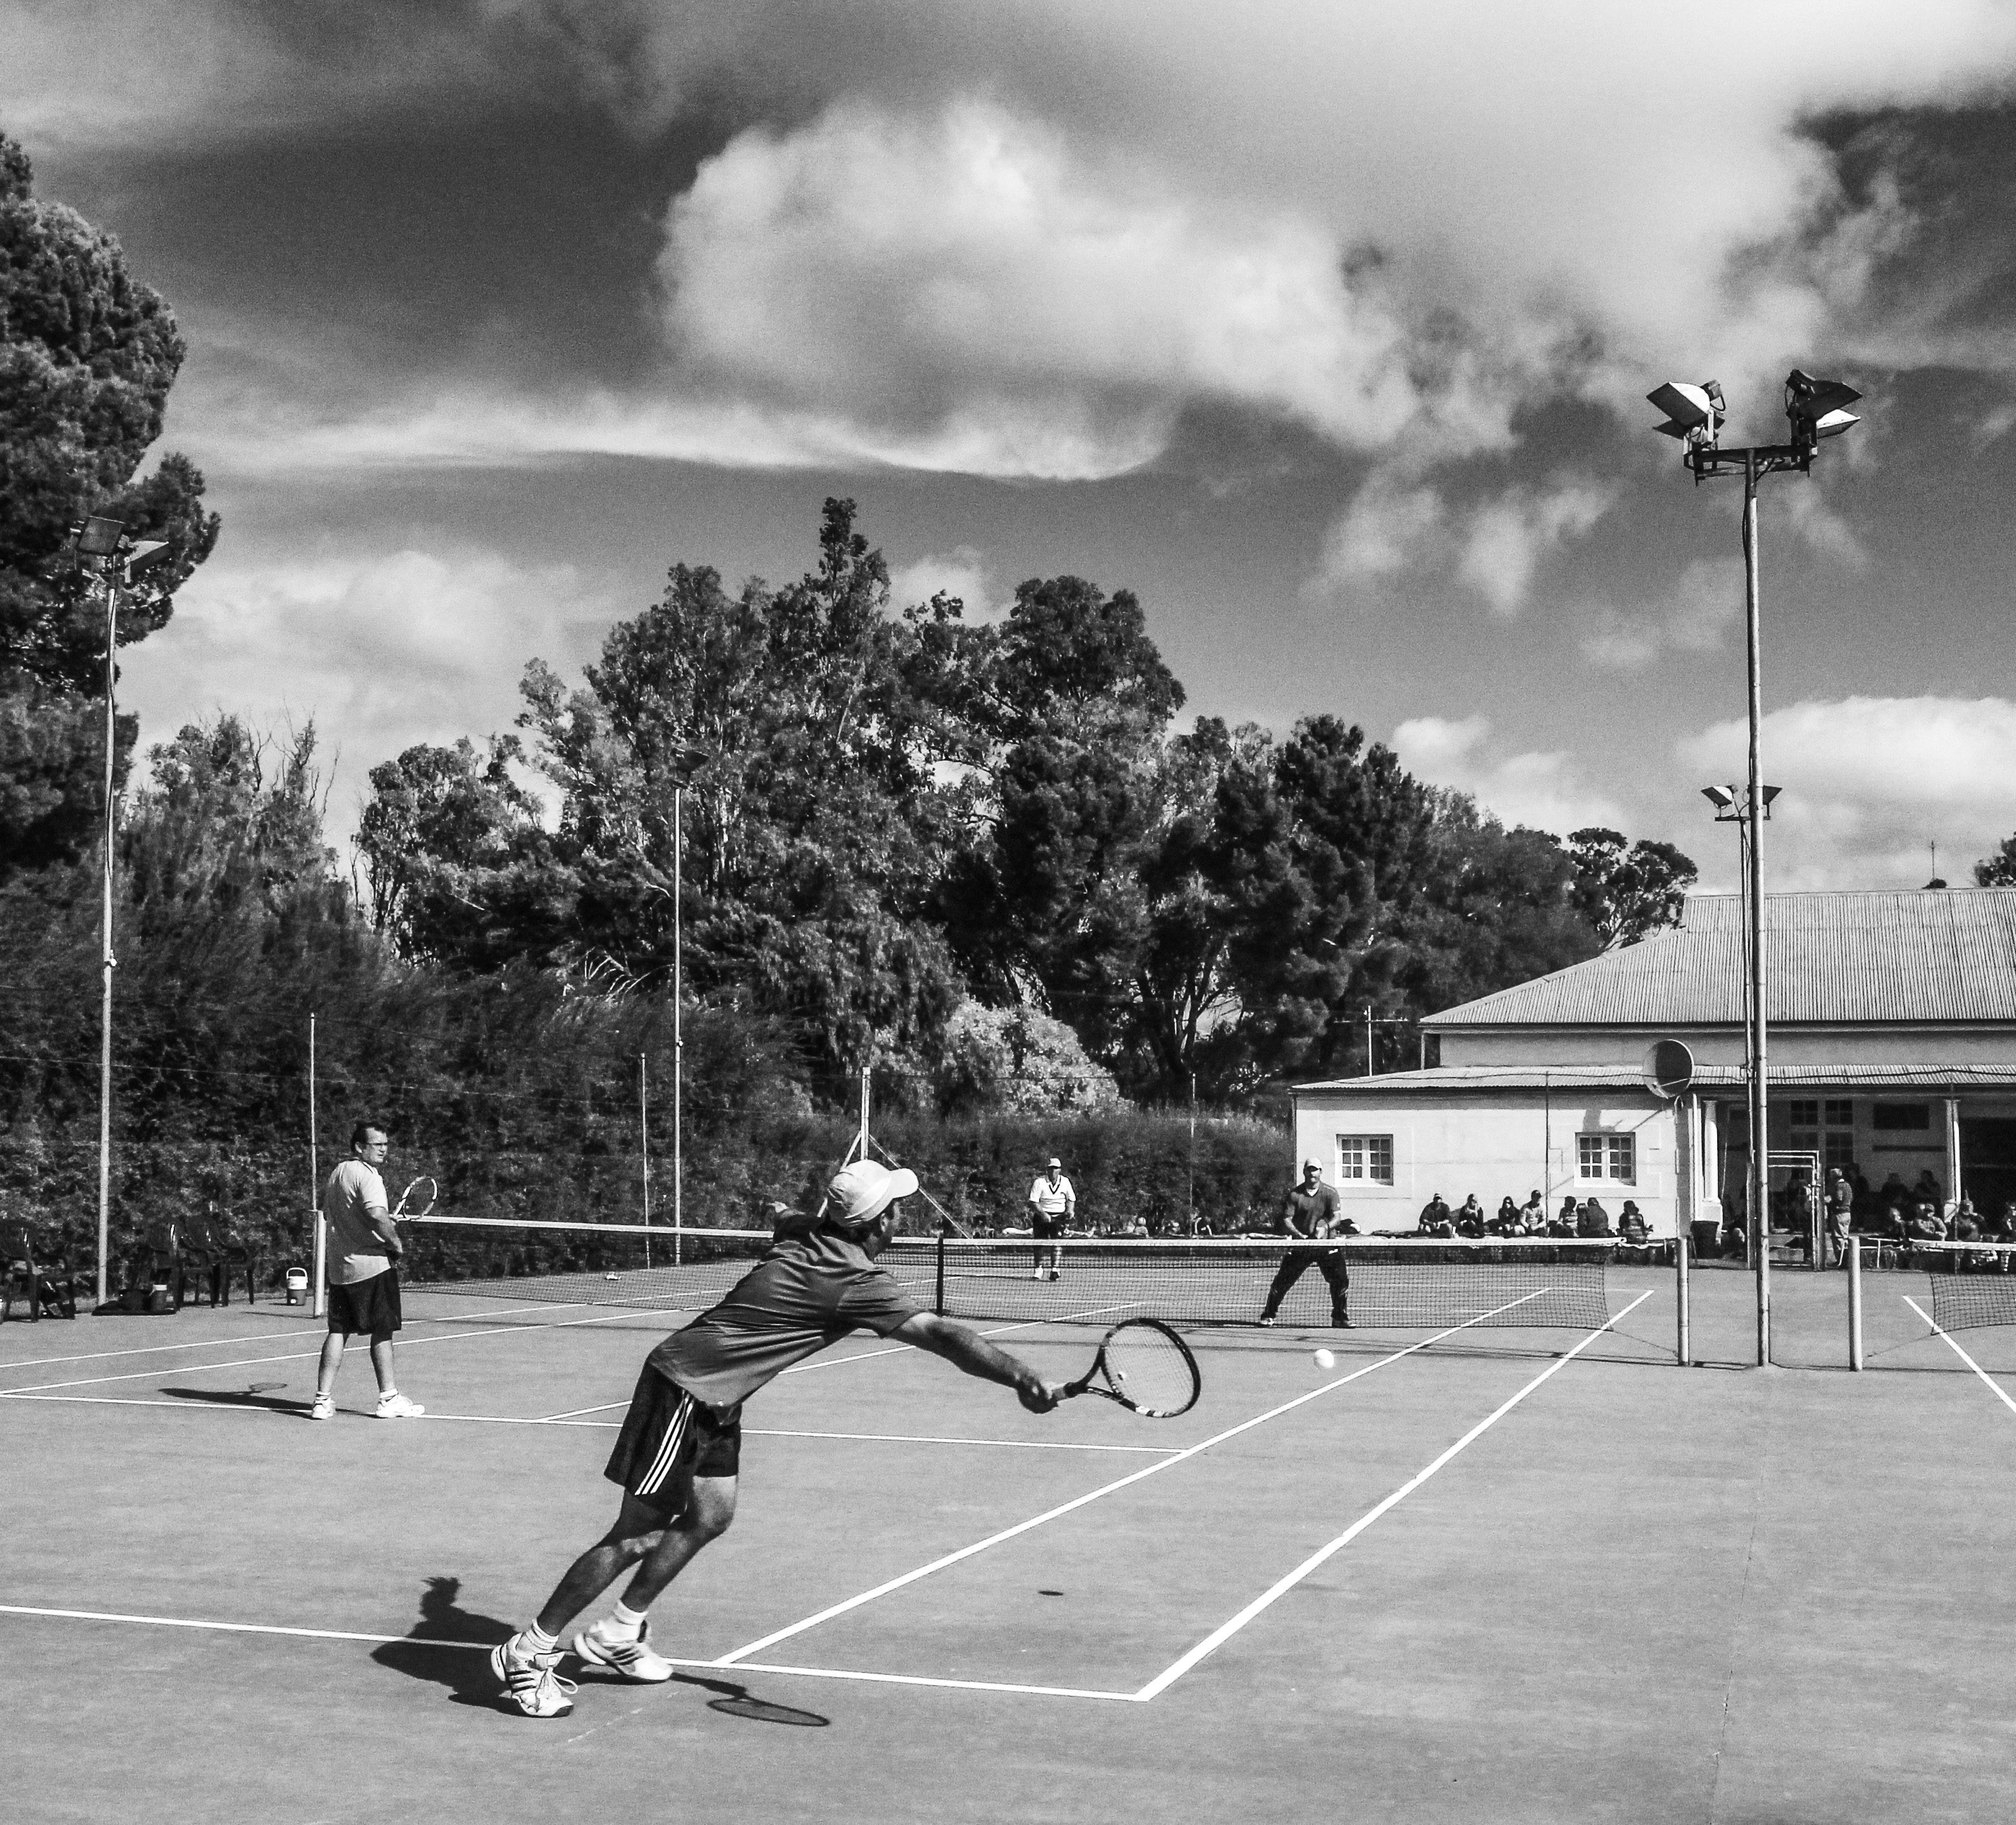 The Fish River Tennis Club, one of the longest-surviving social sports venues in the Karoo. Photograph by Chris Marais.